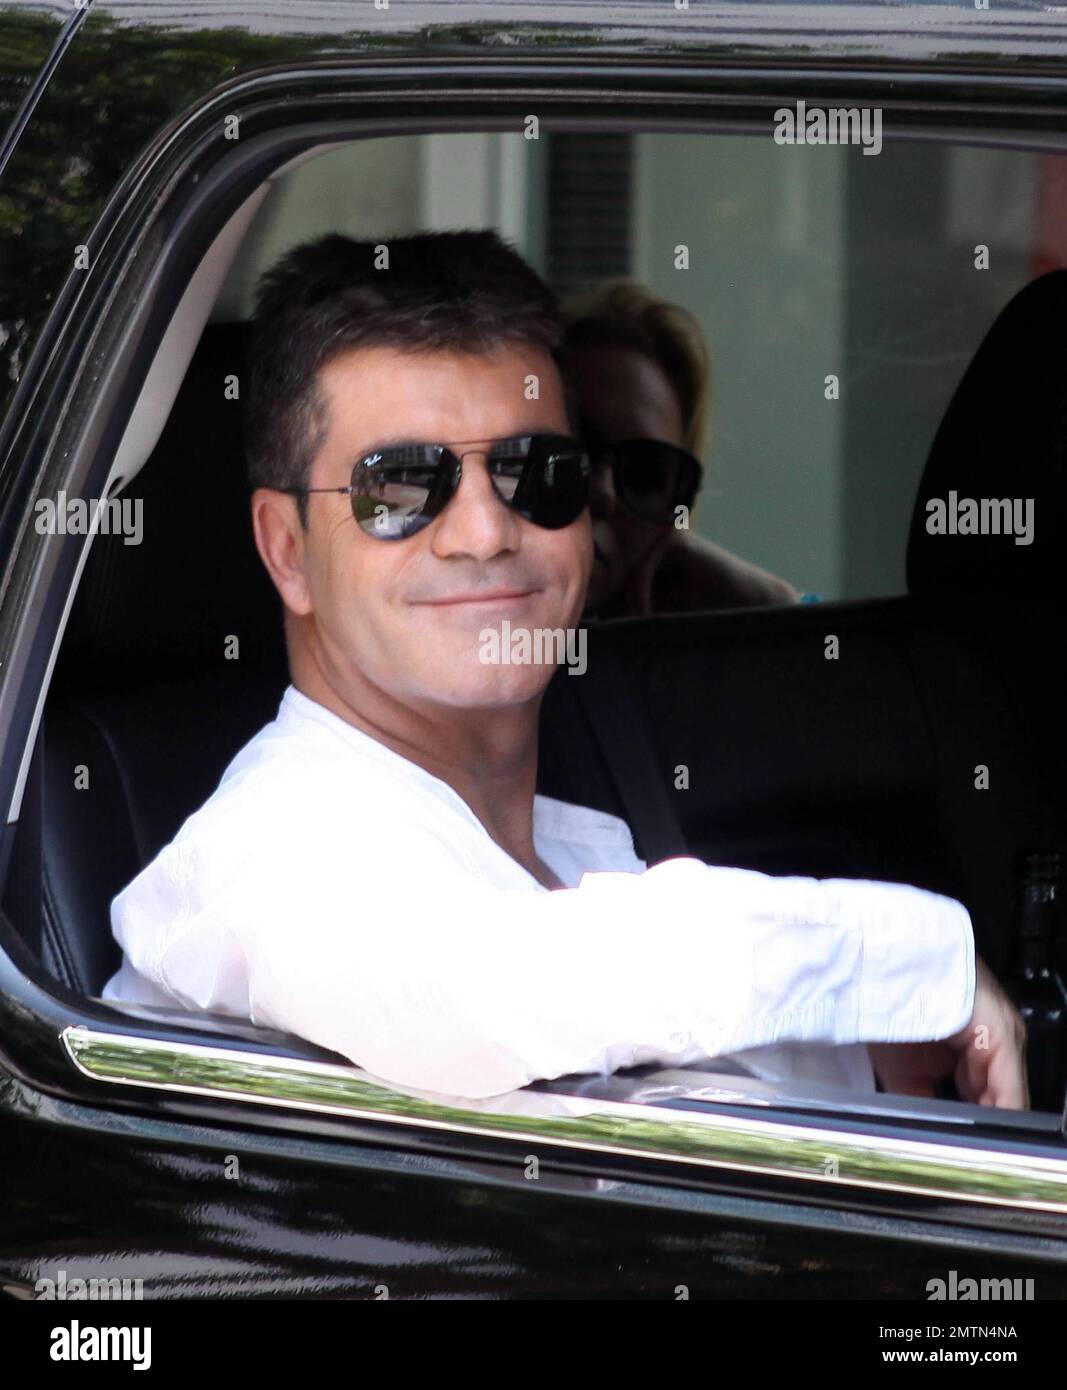 In town for "The X-Factor" auditions, Simon Cowell carries his clothes on  hangers as he leaves his luxury hotel. Once inside the waiting SUV, Cowell  lit up a cigarette and waved before